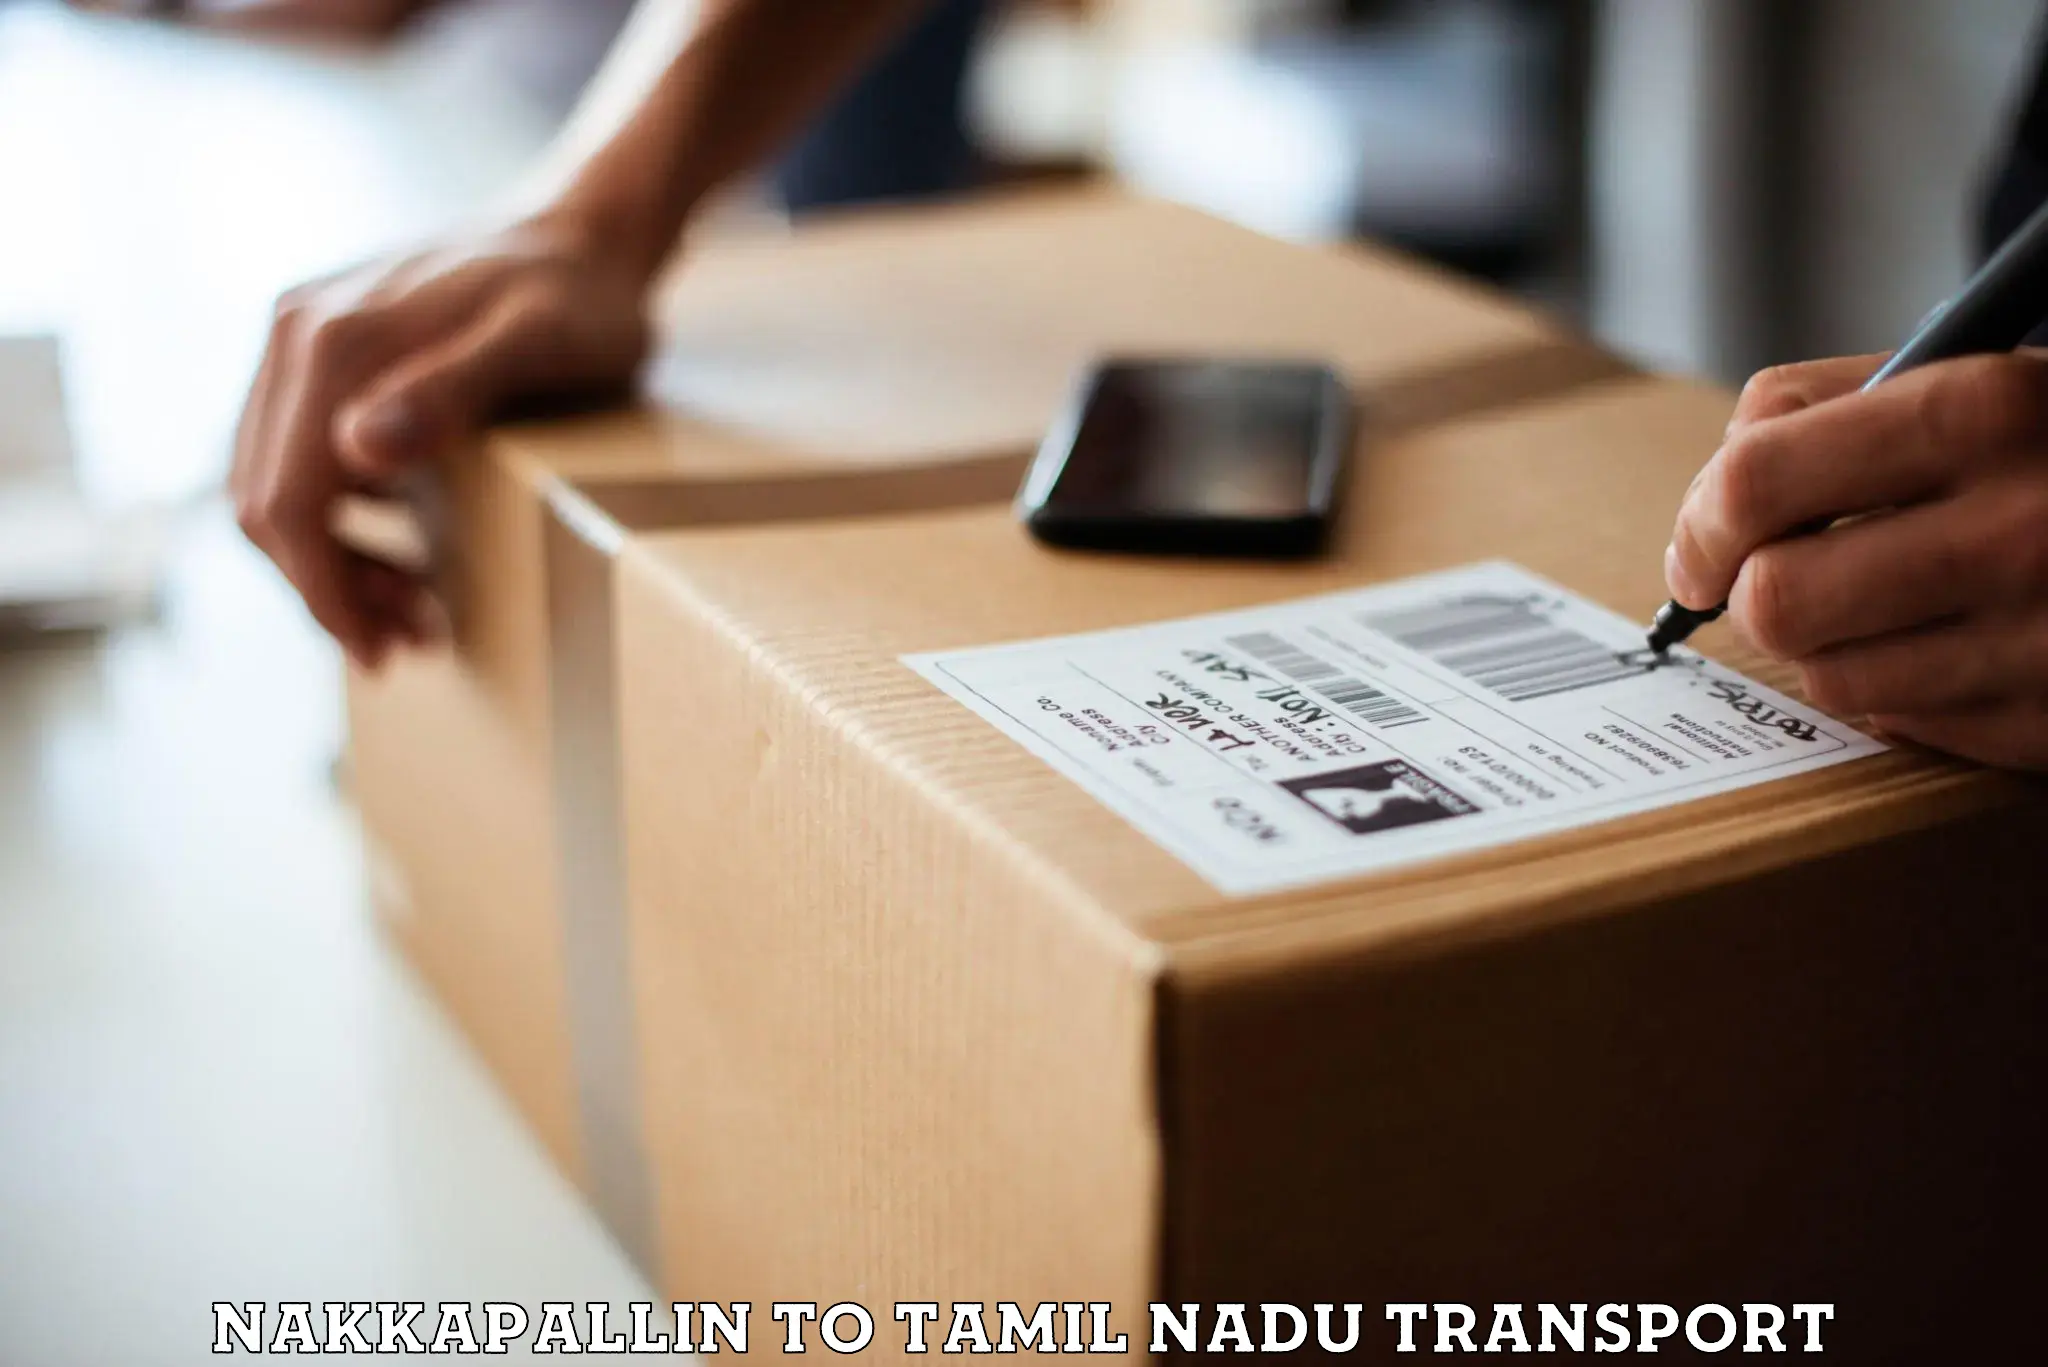 Nationwide transport services Nakkapallin to Bharath Institute of Higher Education and Research Chennai